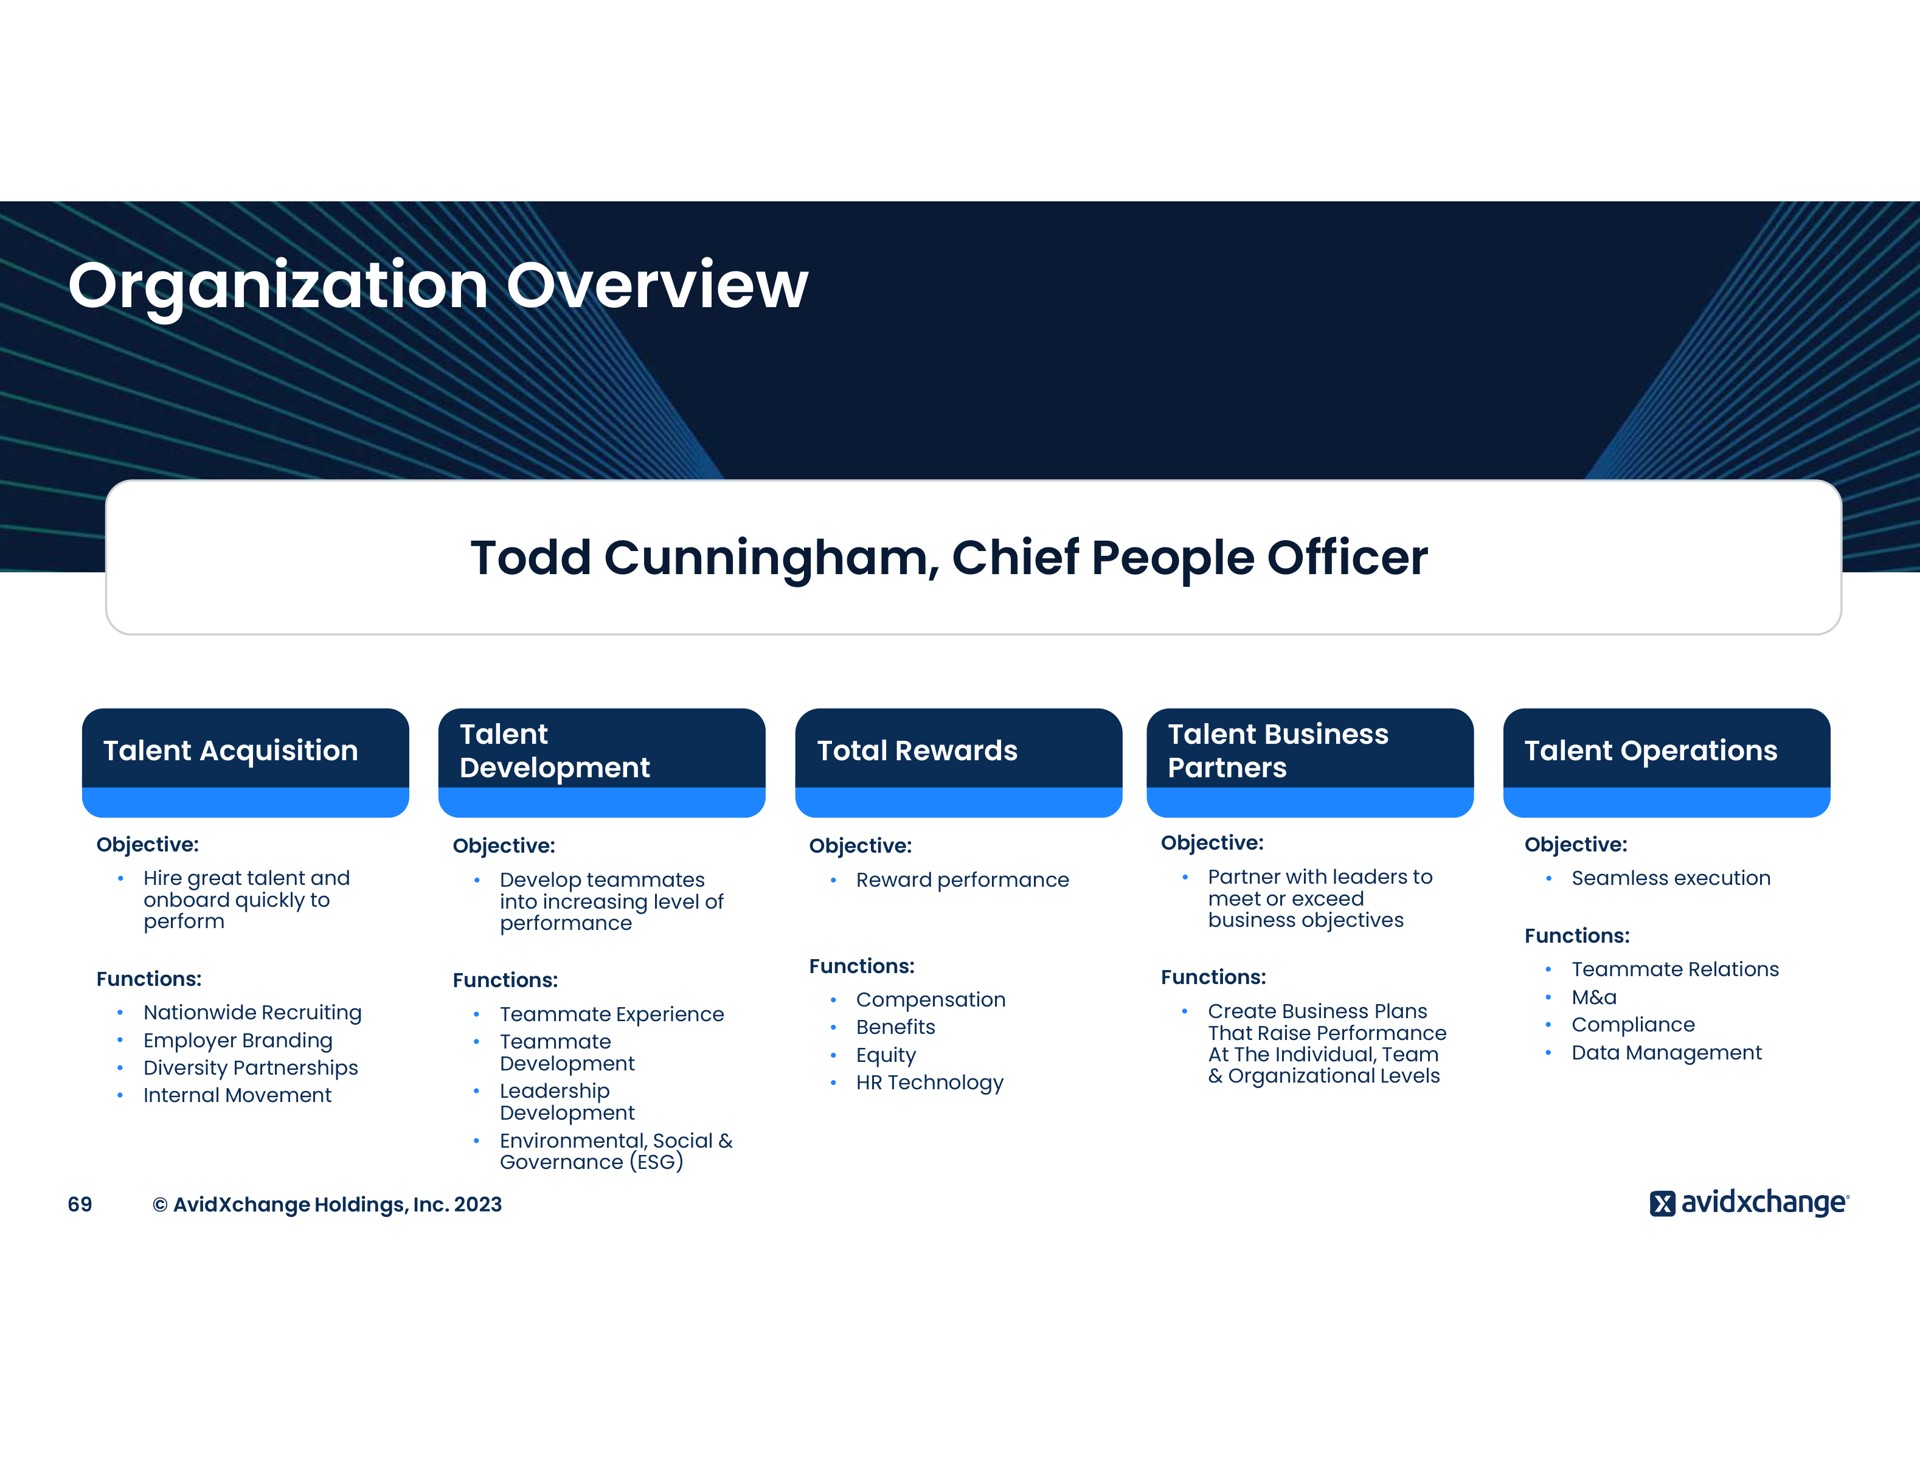 organization overview chief people officer | AvidXchange